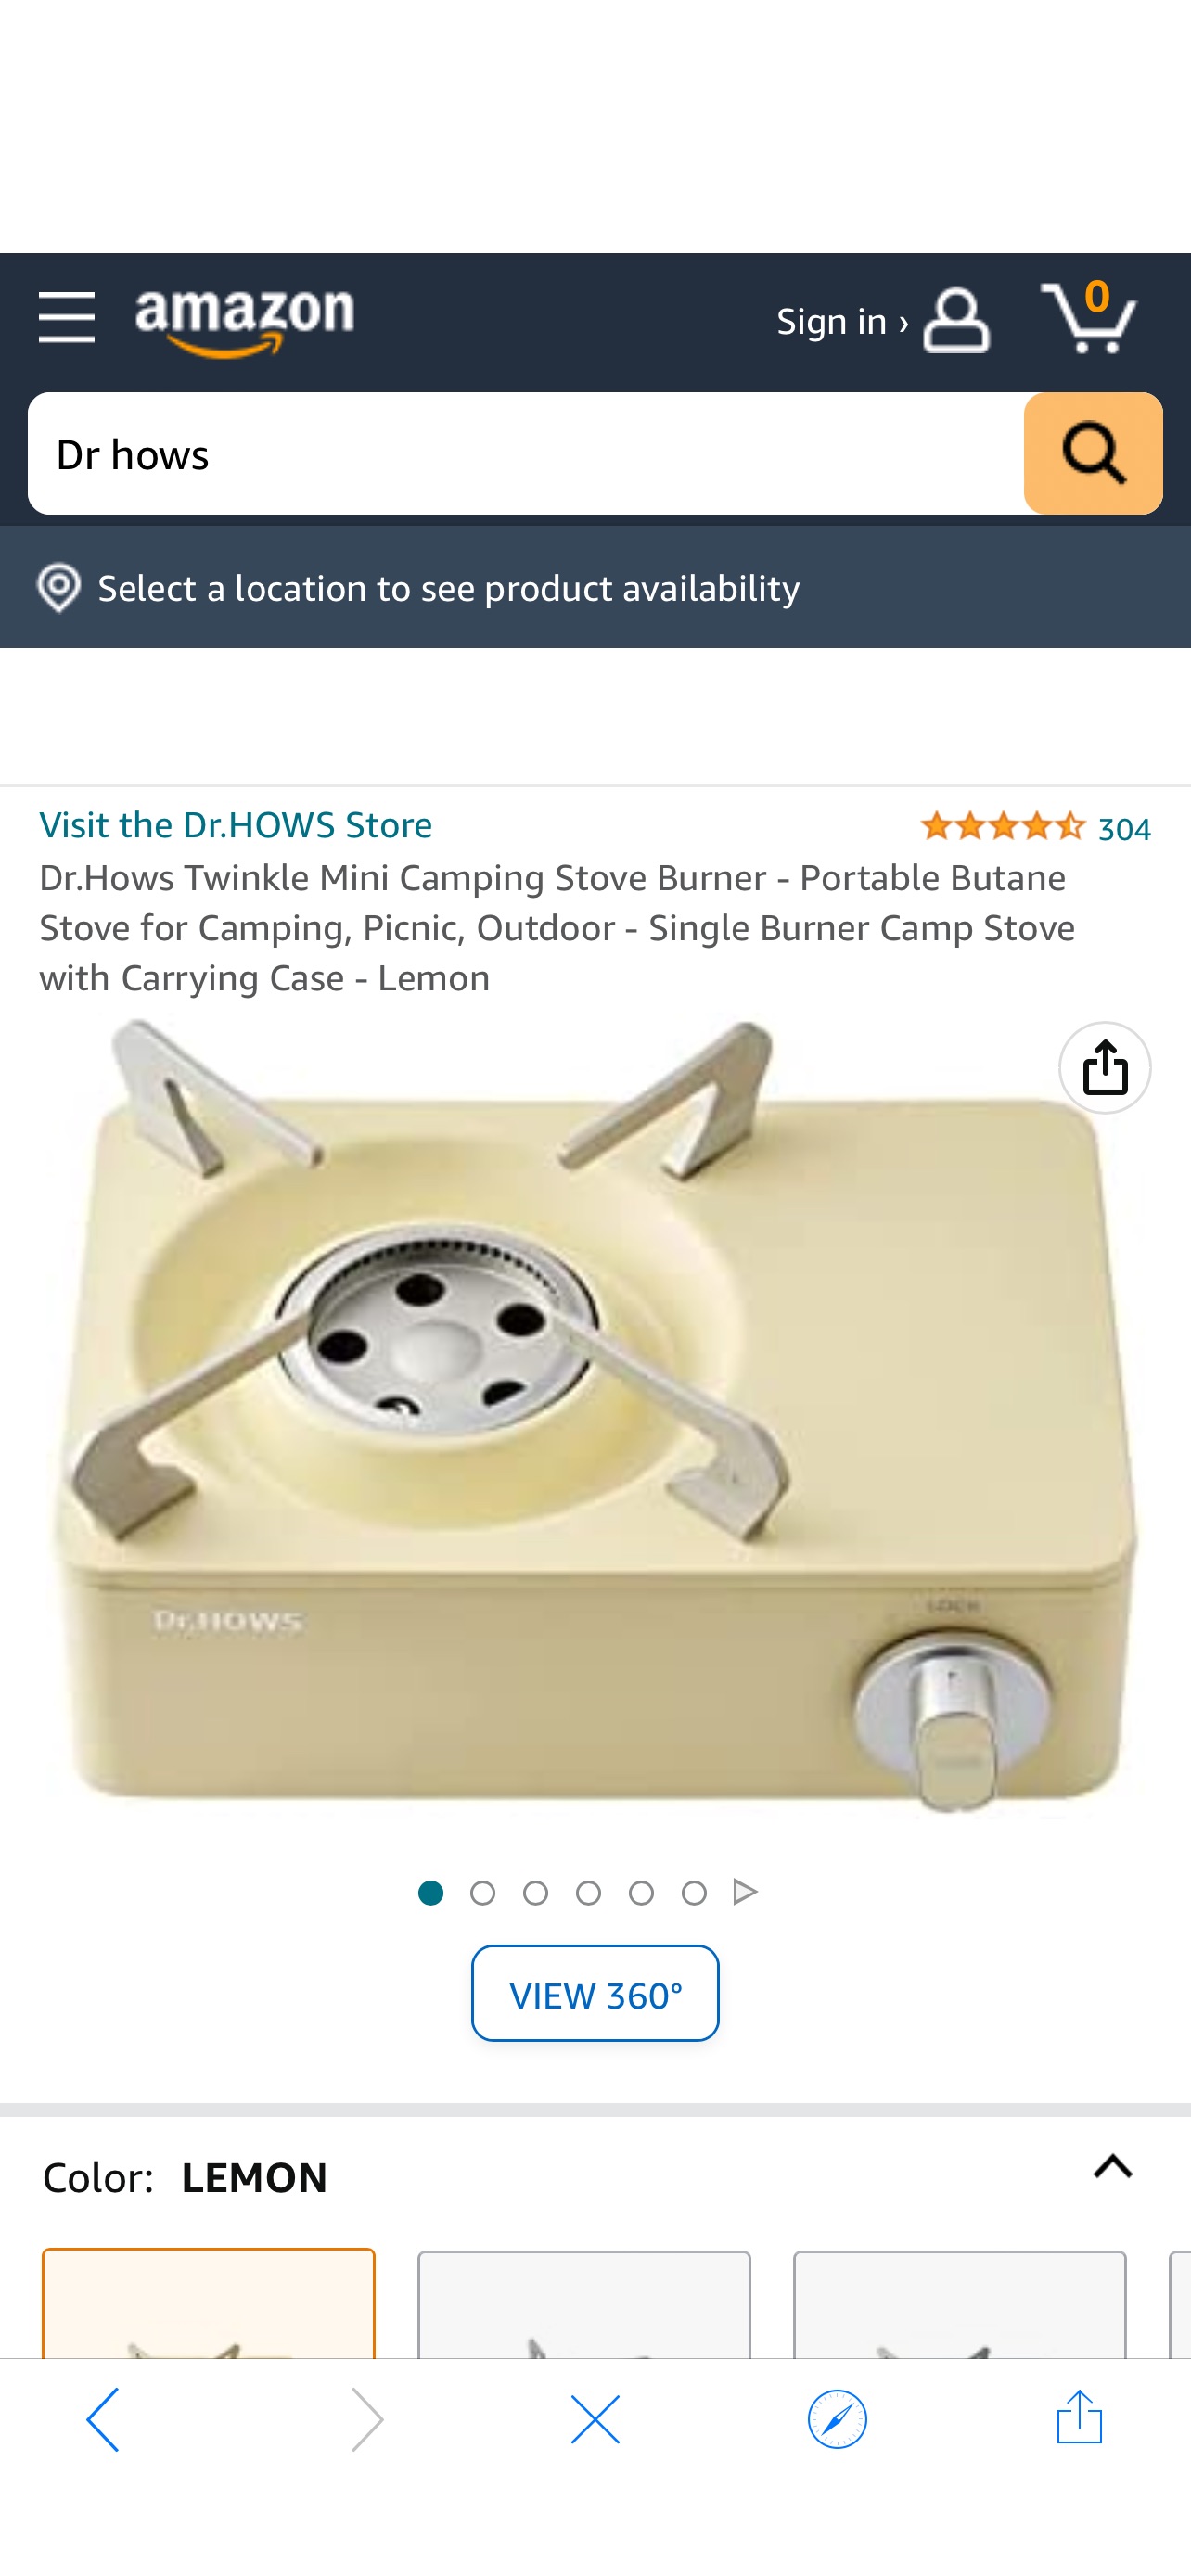 Amazon.com: Dr.Hows Twinkle Mini Camping Stove Burner - Portable Butane Stove for Camping, Picnic, Outdoor - Single Burner Camp Stove with Carrying Case - Lemon : Sports & Outdoors